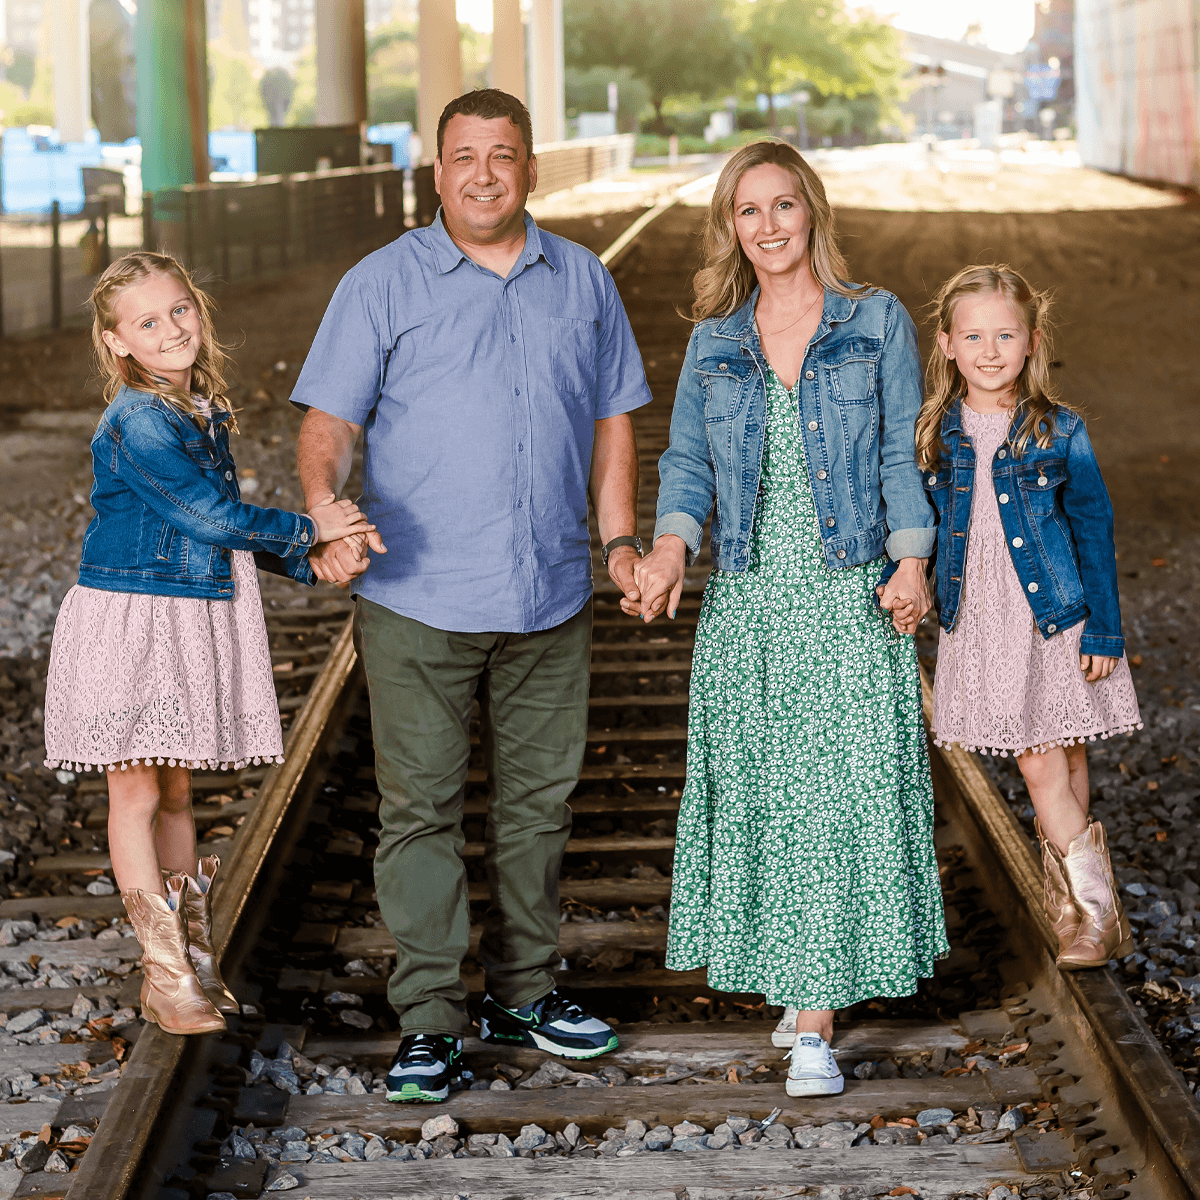 The Johnson Family is walking around outside down the railroad tracks representing the journey of healing they are on.